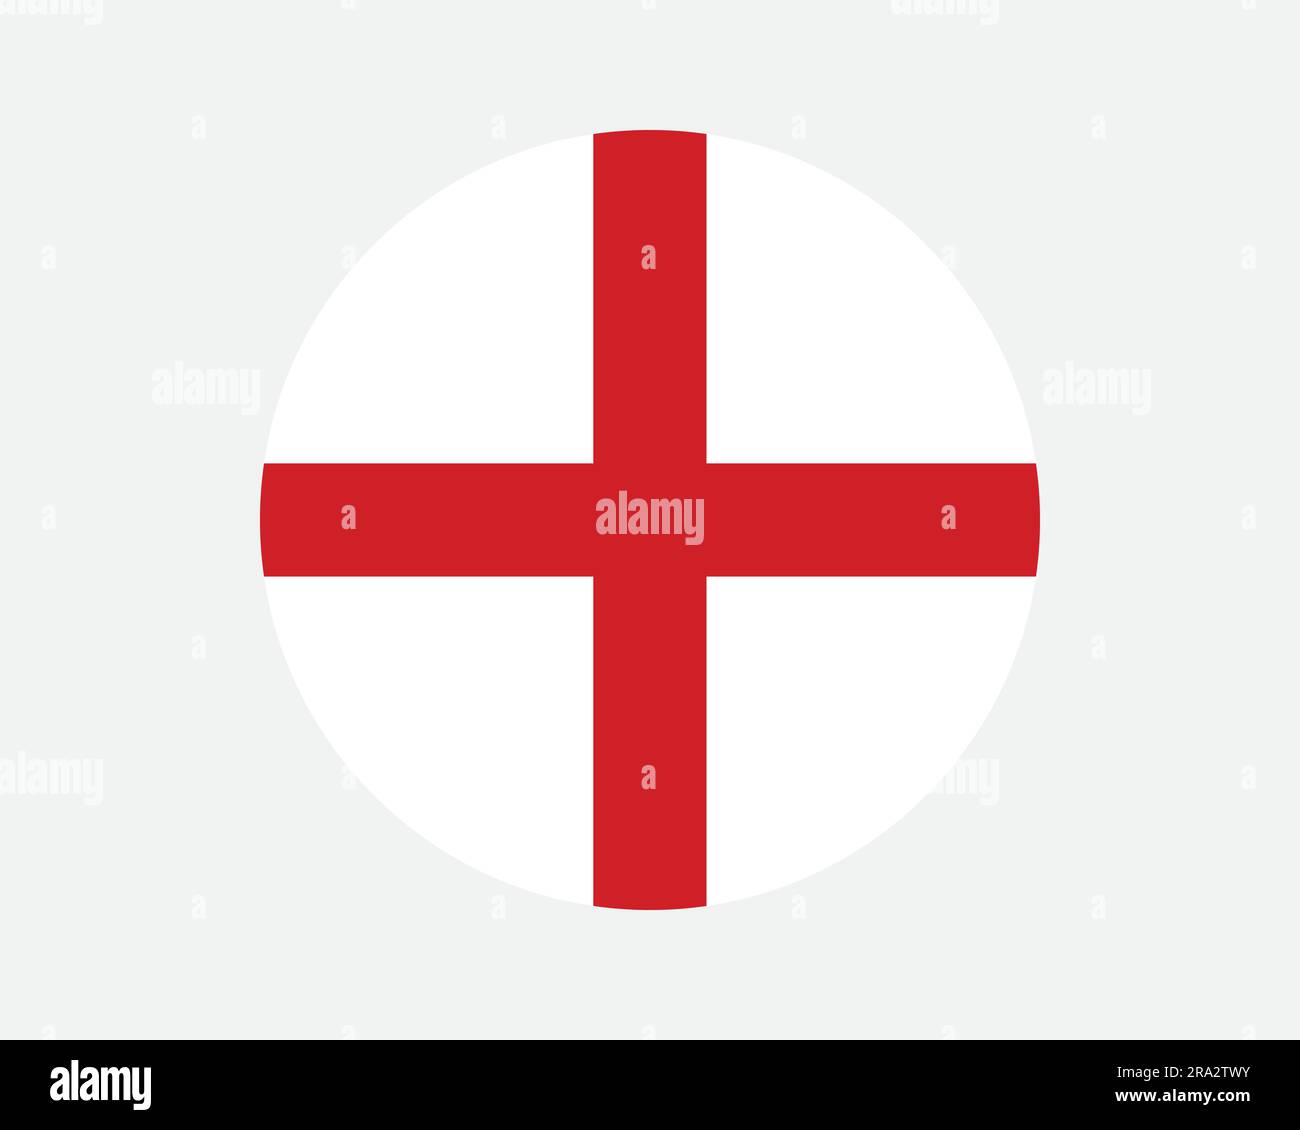 England Round Flag. English Circle Nation Country National Banner. White Red Cross UK United Kingdom. Graphic Clipart Artwork Symbol Sign Vector EPS Stock Vector